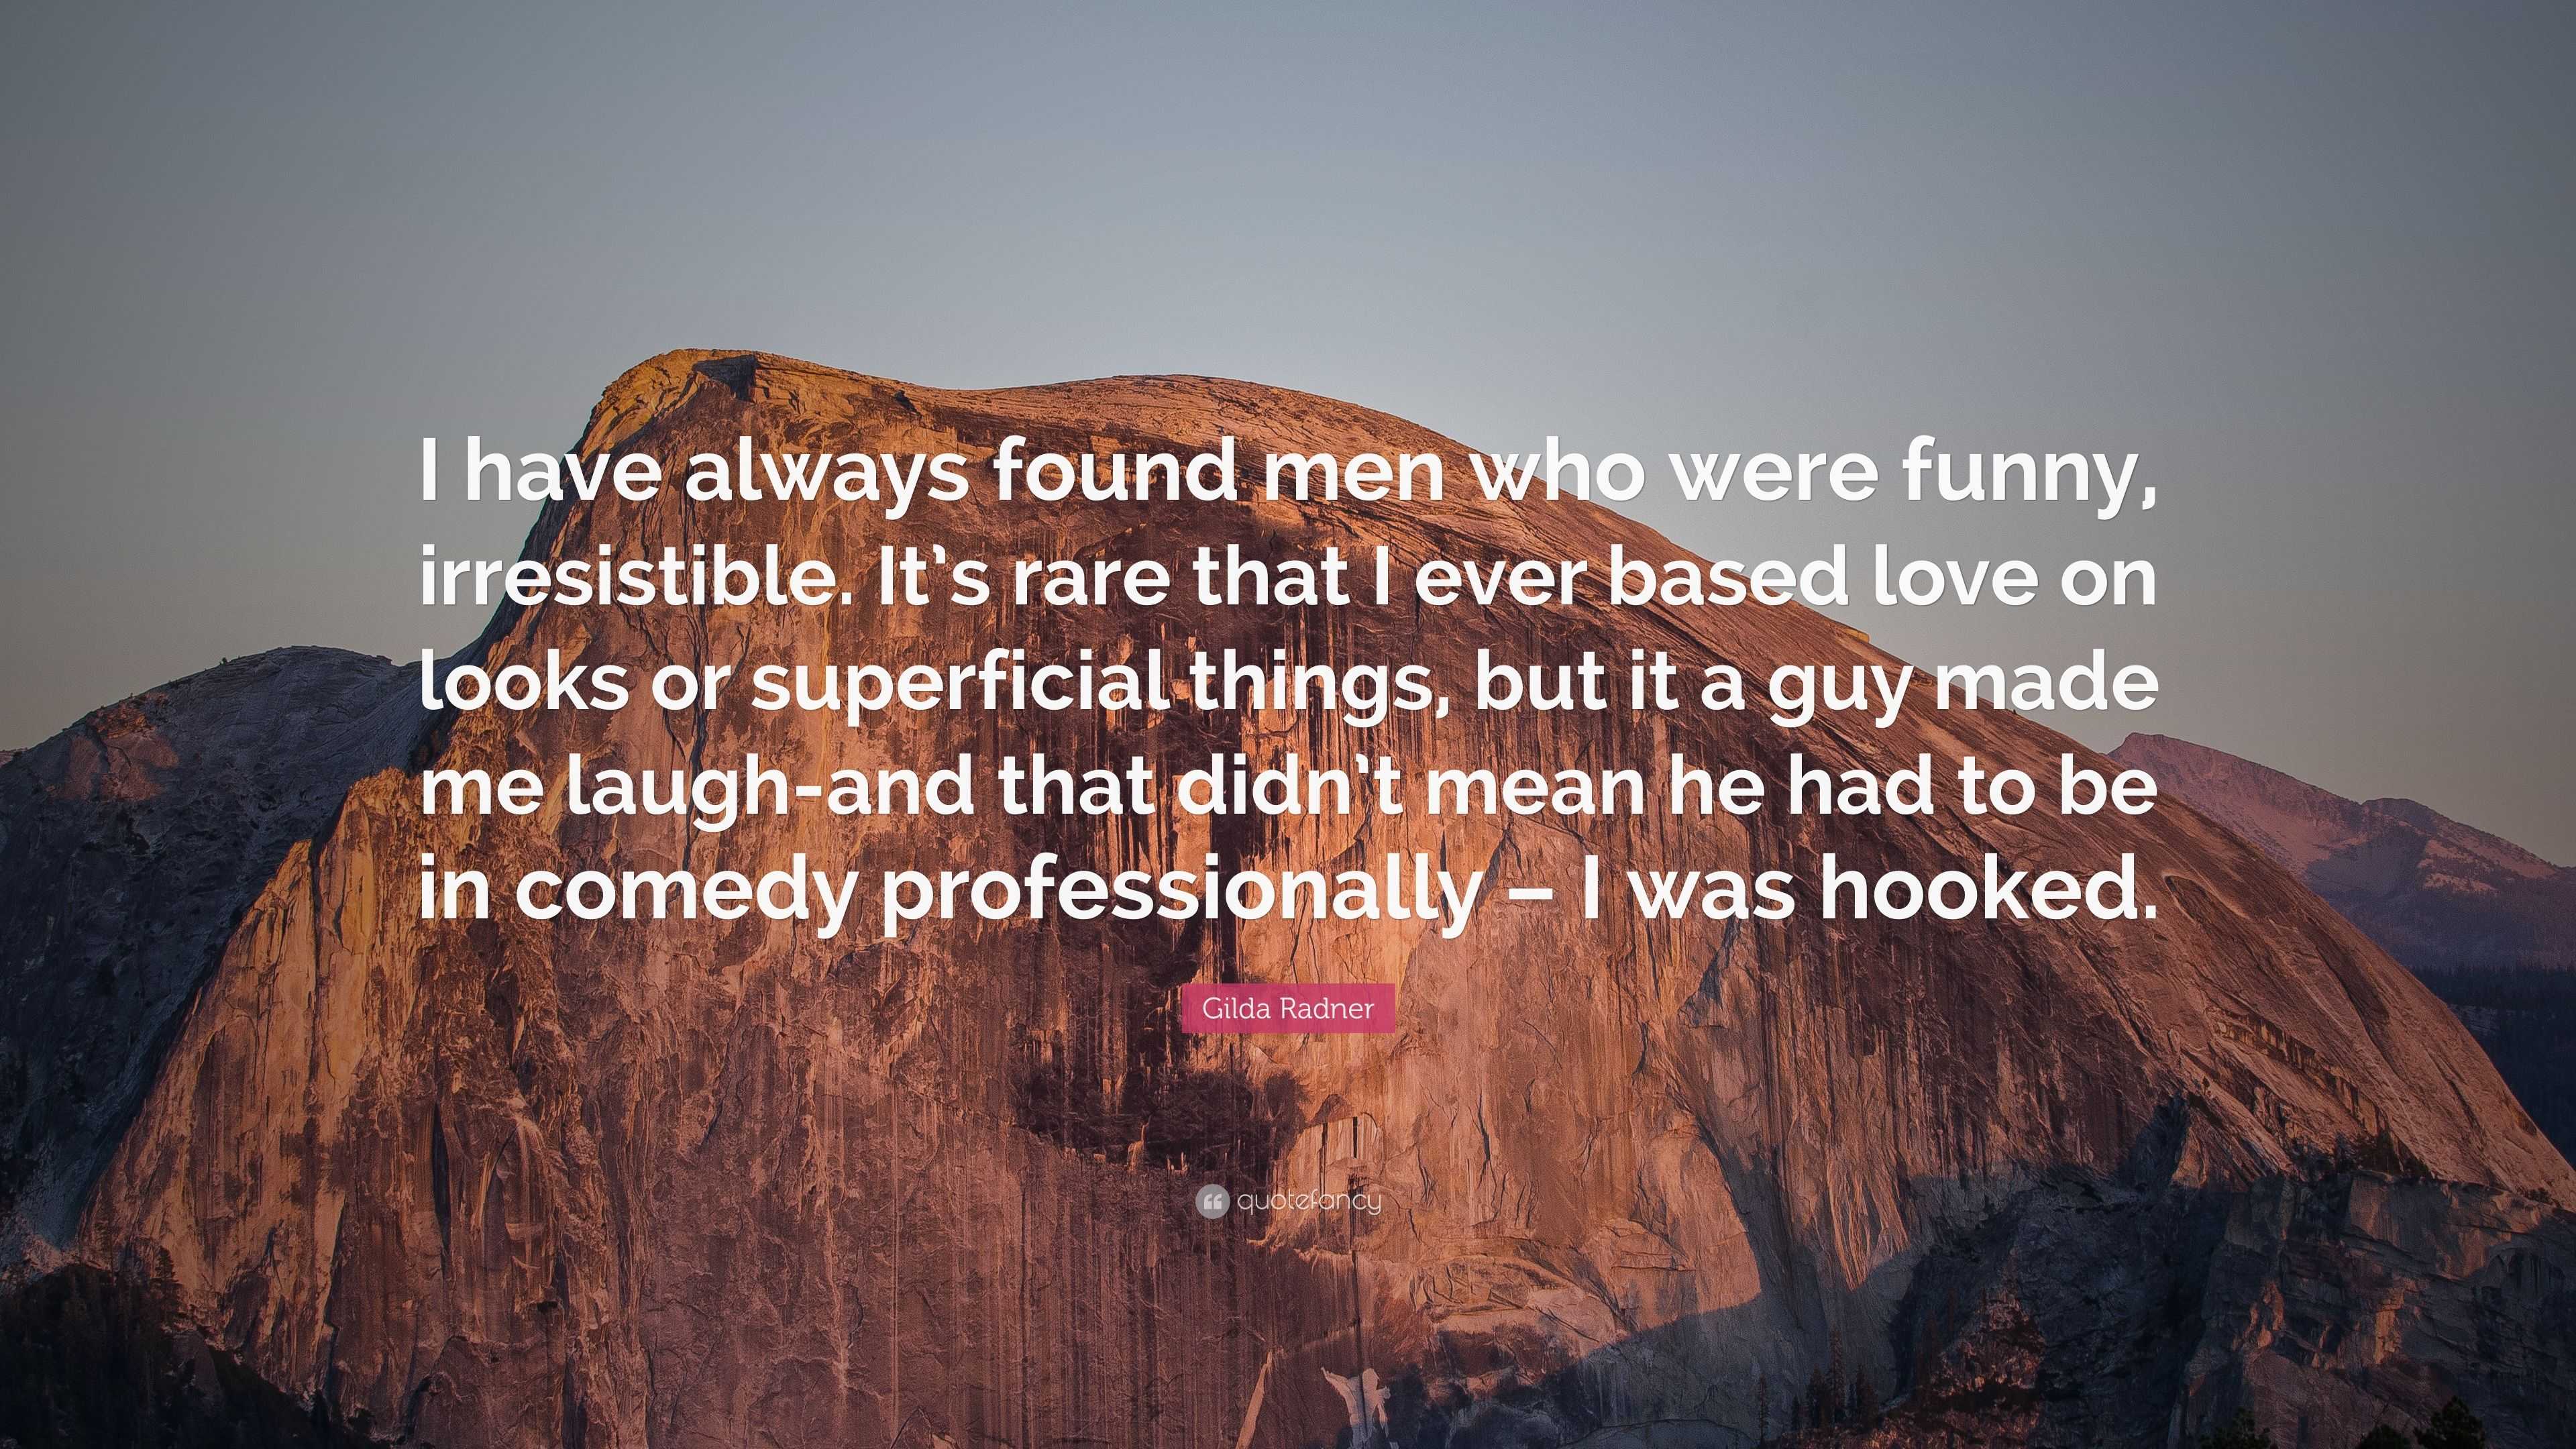 Gilda Radner Quote: “I have always found men who were funny, irresistible.  It's rare that I ever based love on looks or superficial things, b...”